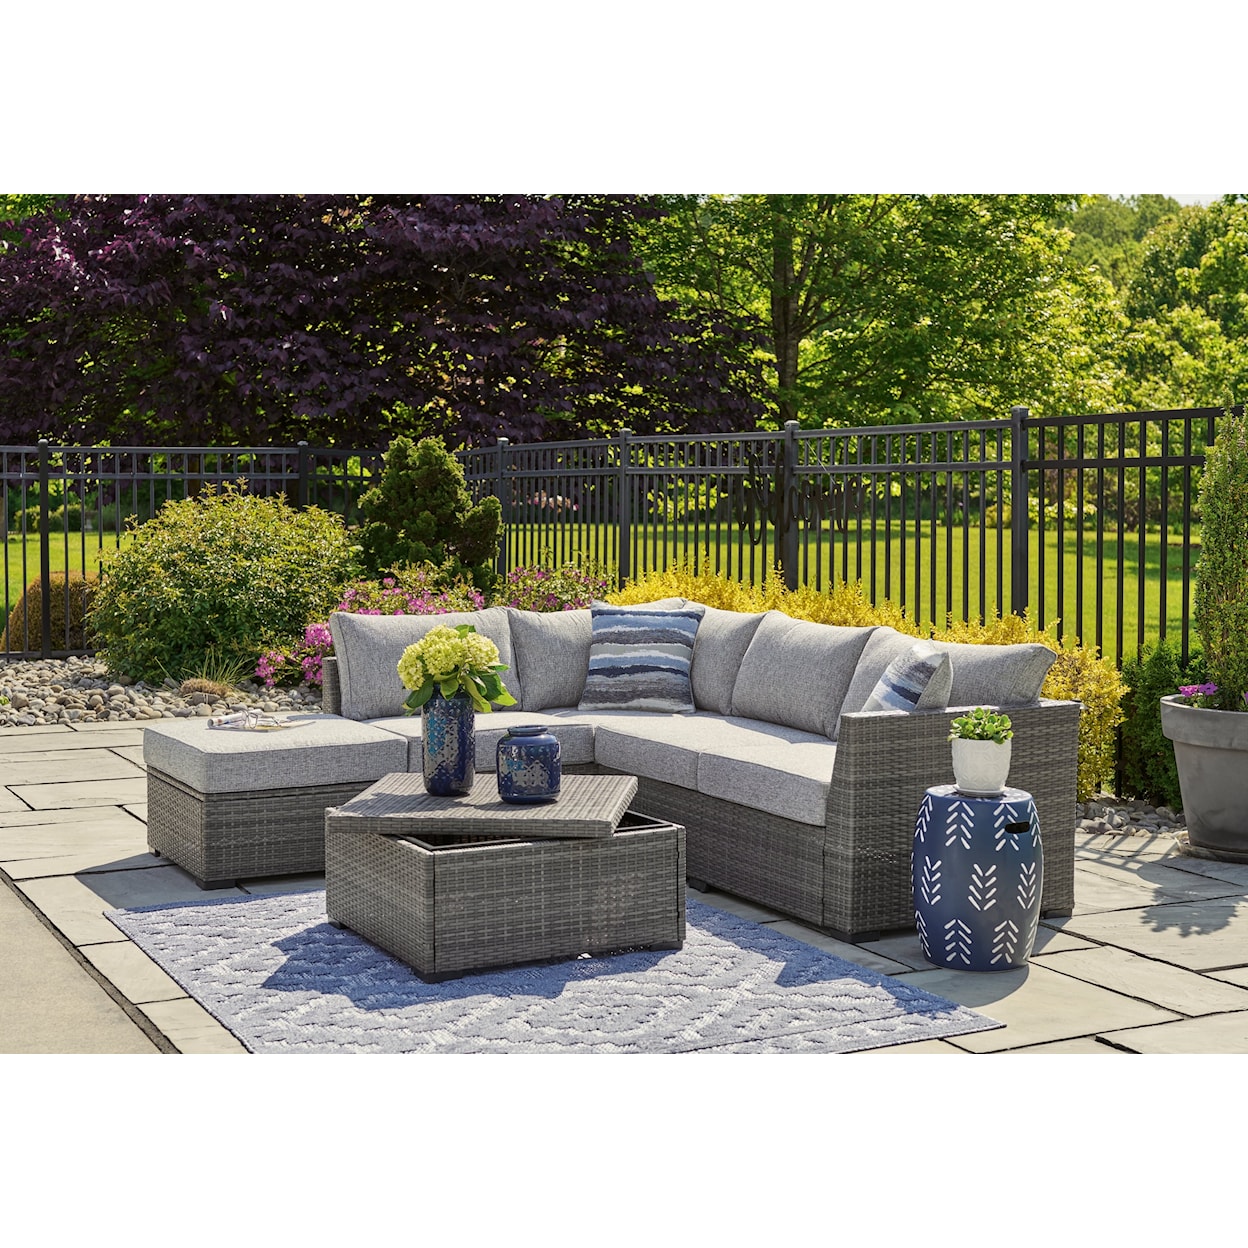 Ashley Furniture Signature Design Petal Road Outdoor Sectional Set with Ottoman & Table